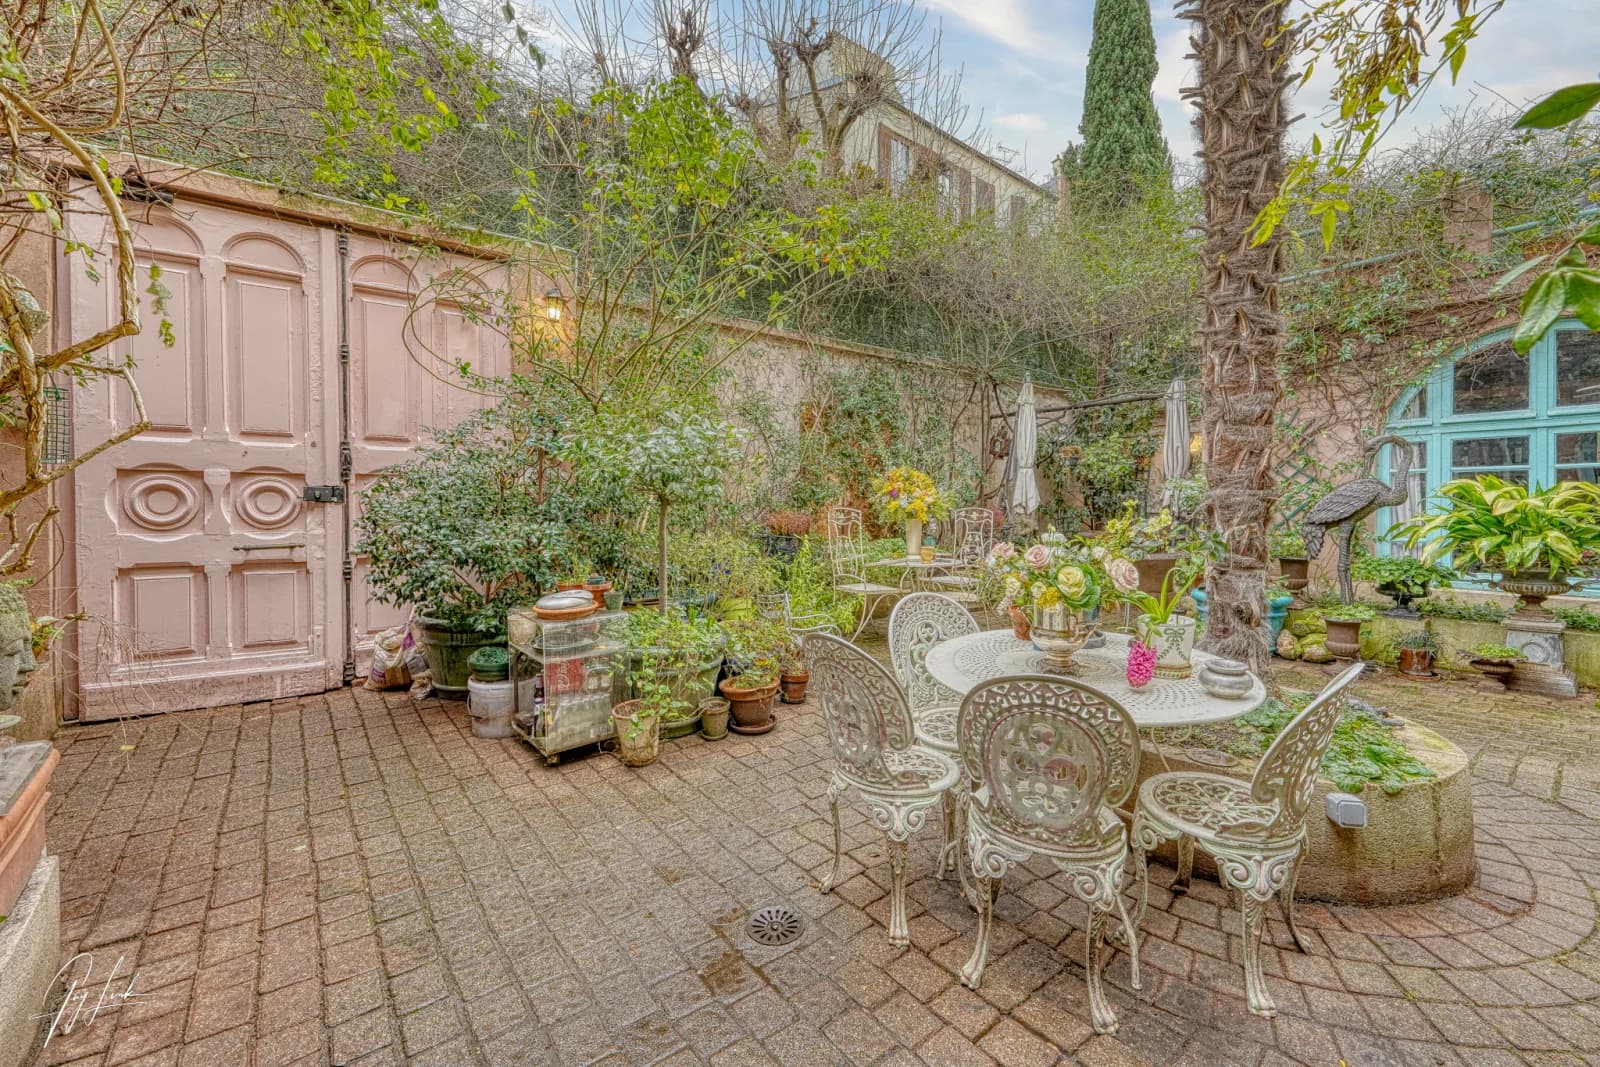 Space Magic parisian house with flowered courtyard - 4